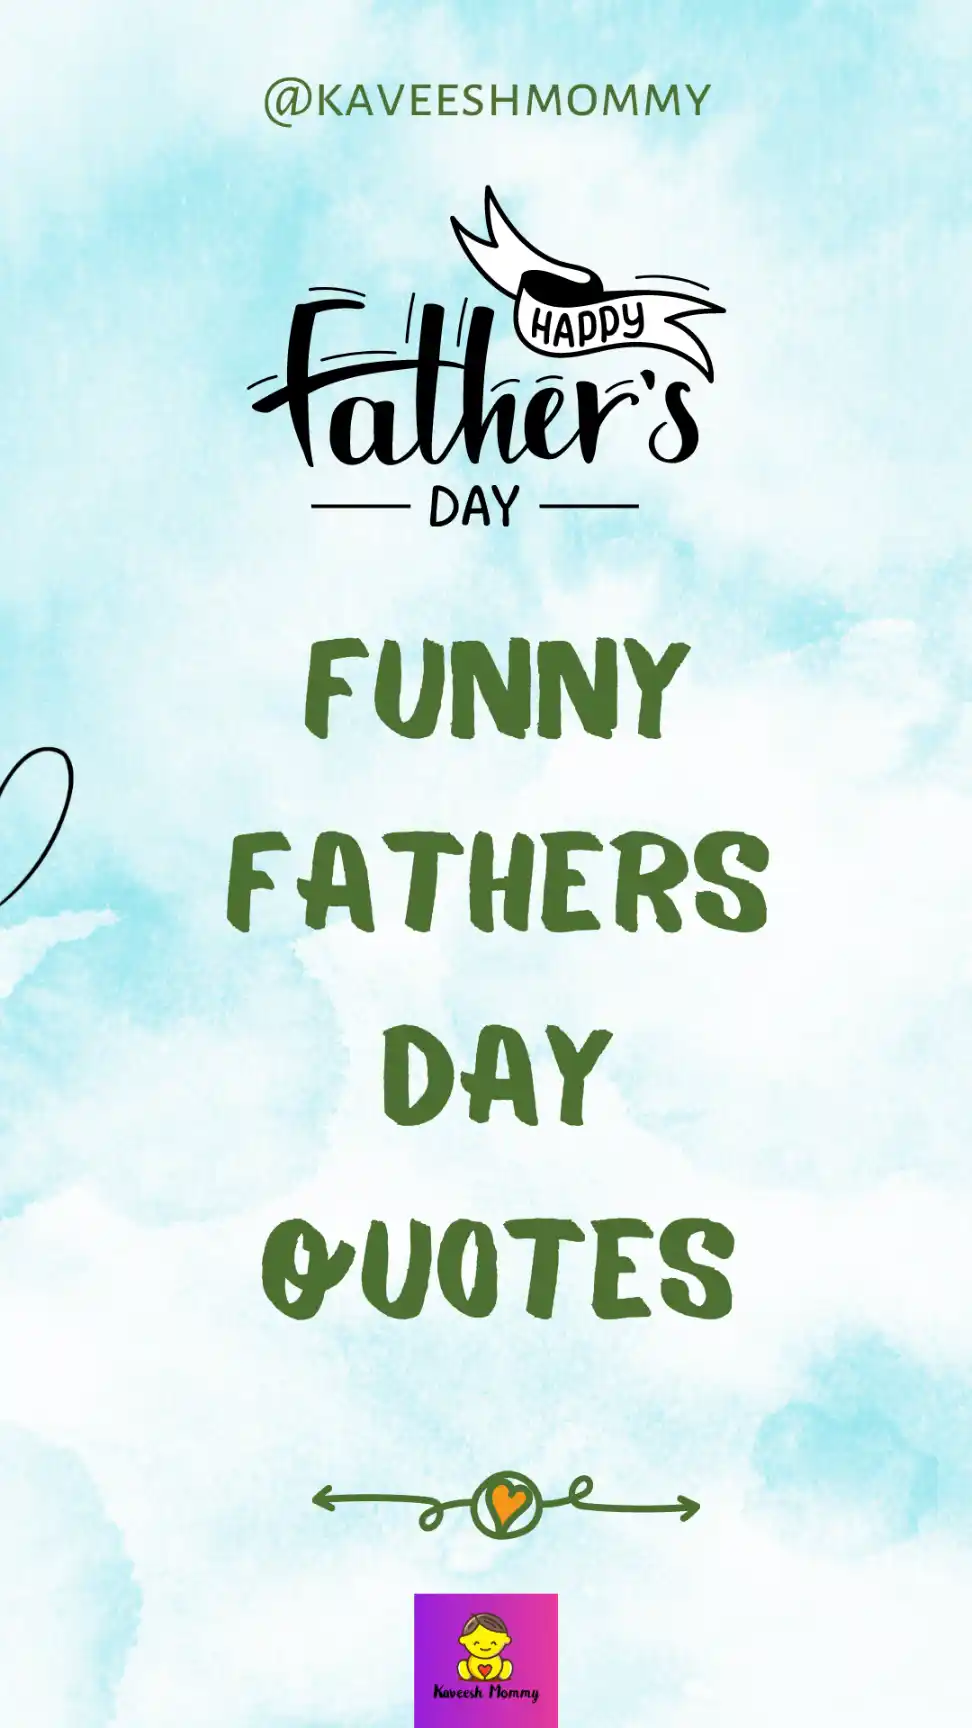 list of Funny Fathers Day Quotes. Messages, Jokes, and Wishes- kaveesh mommy 